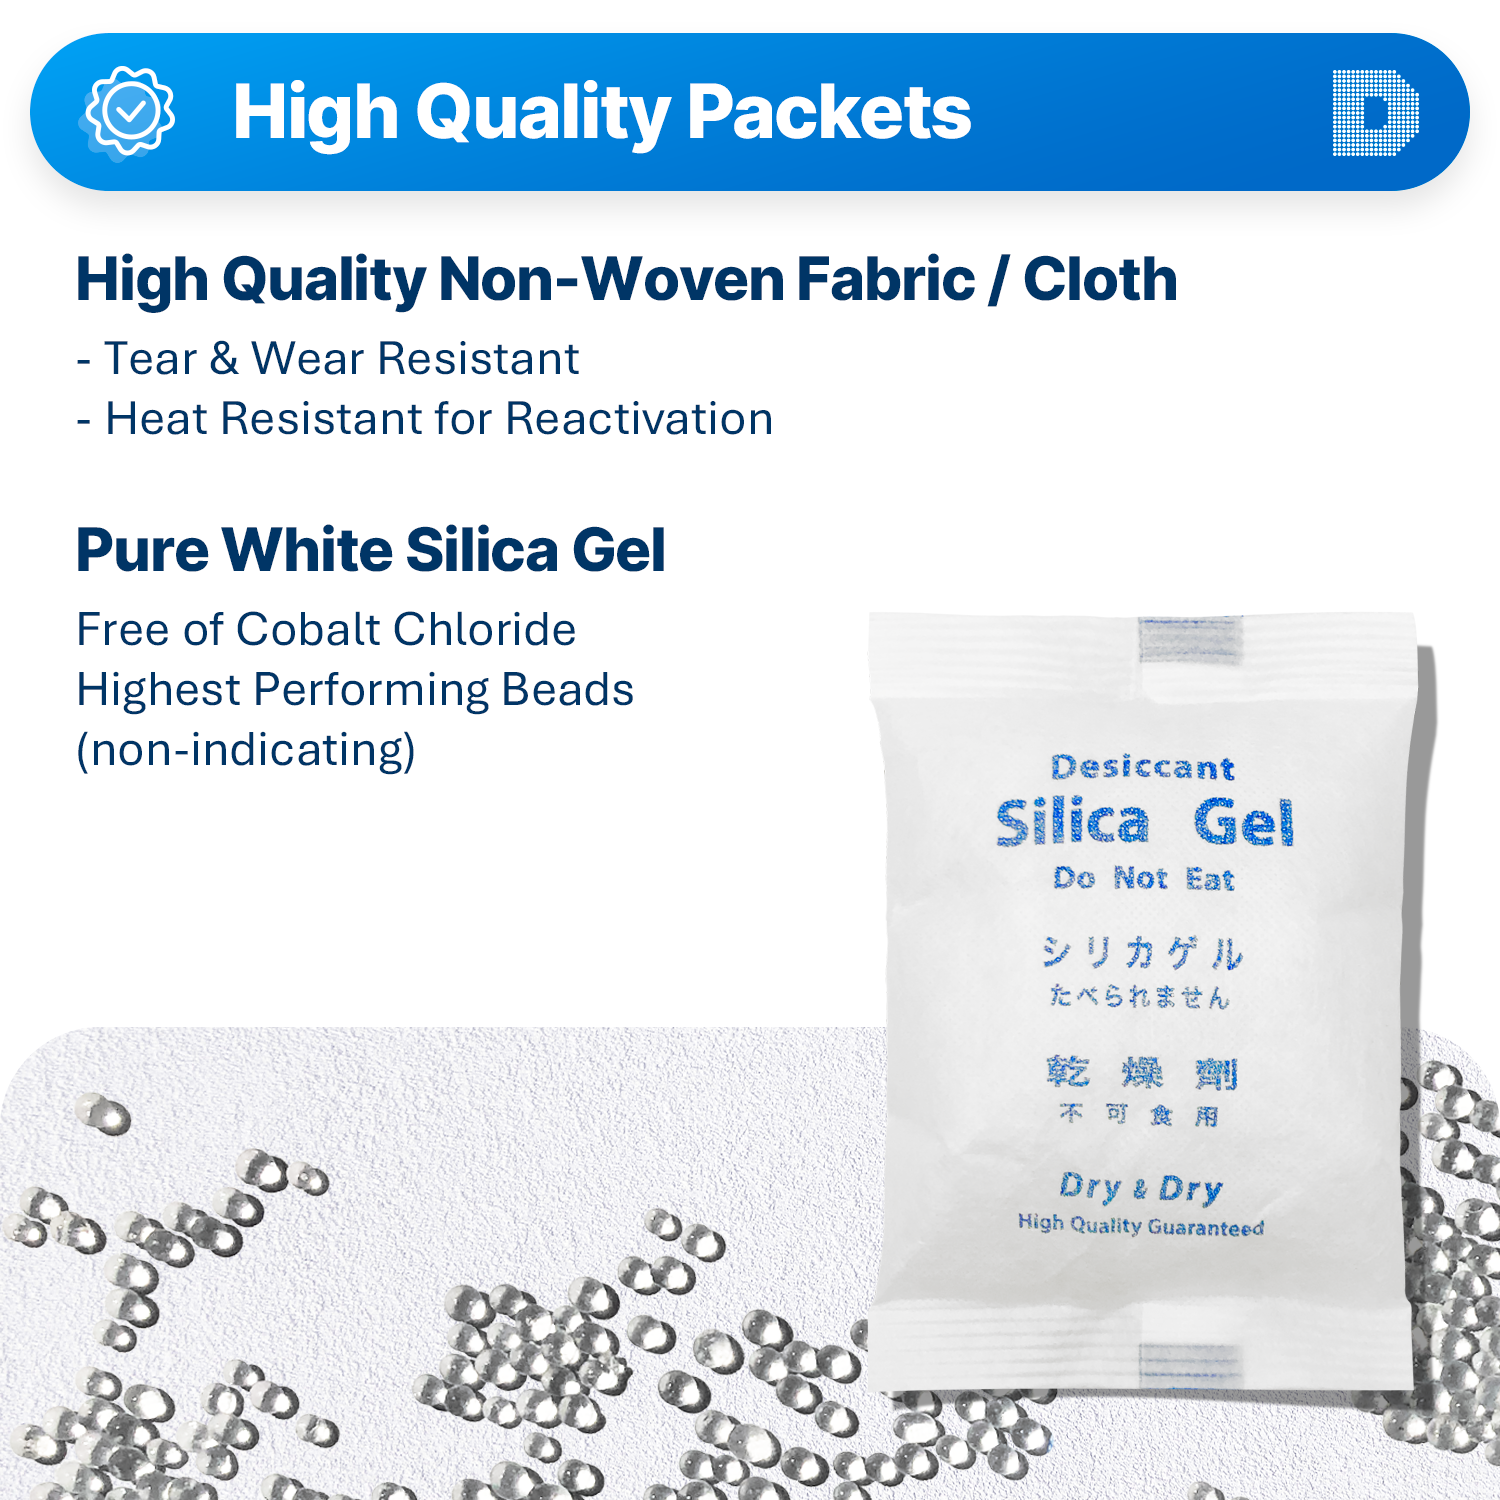 200 Gram [100 Packets]  "Dry & Dry" Premium Silica Gel Desiccant Packets - Rechargeable Fabric